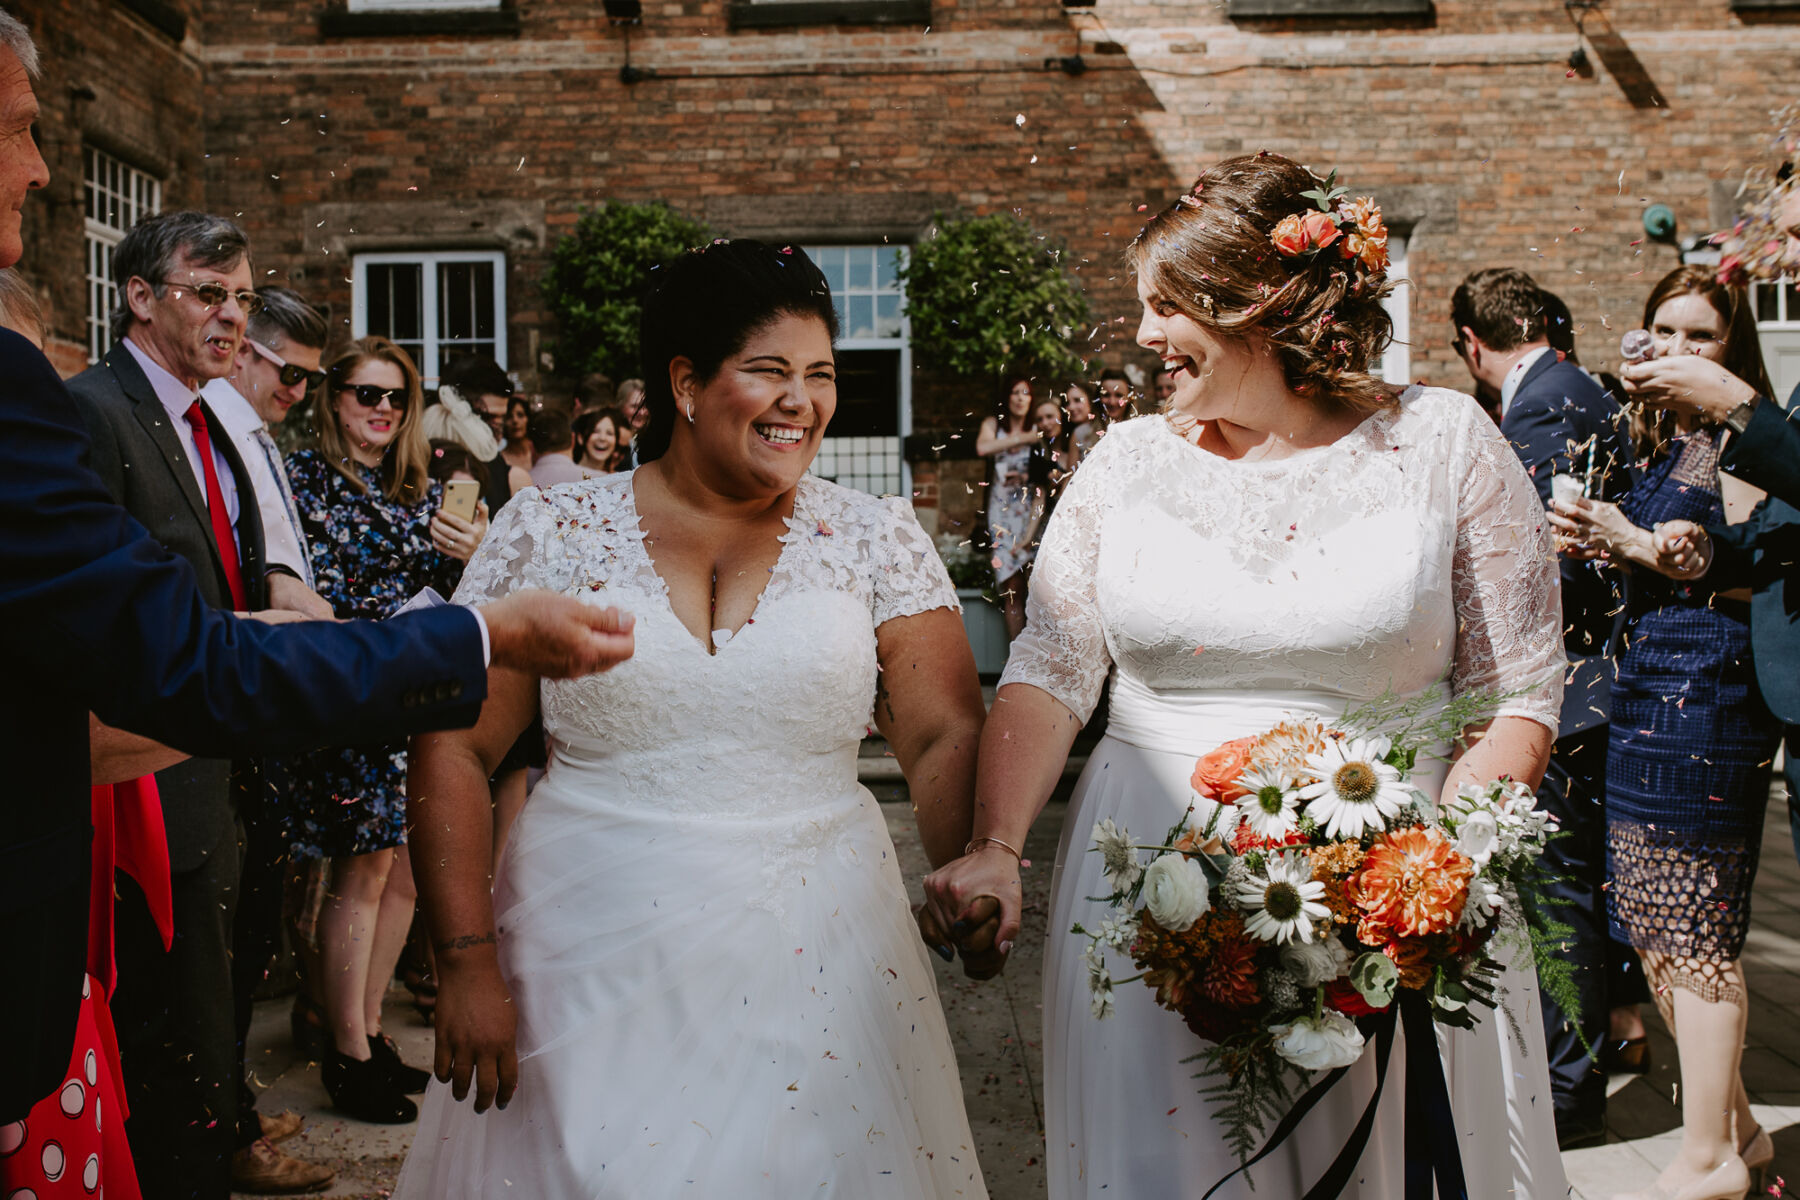 Two Brides and their Cool, Industrial Inspired Wedding in Colours of Copper and Blue at The West Mill, Derbyshire Love My Dress® UK Wedding Blog and Wedding Directory